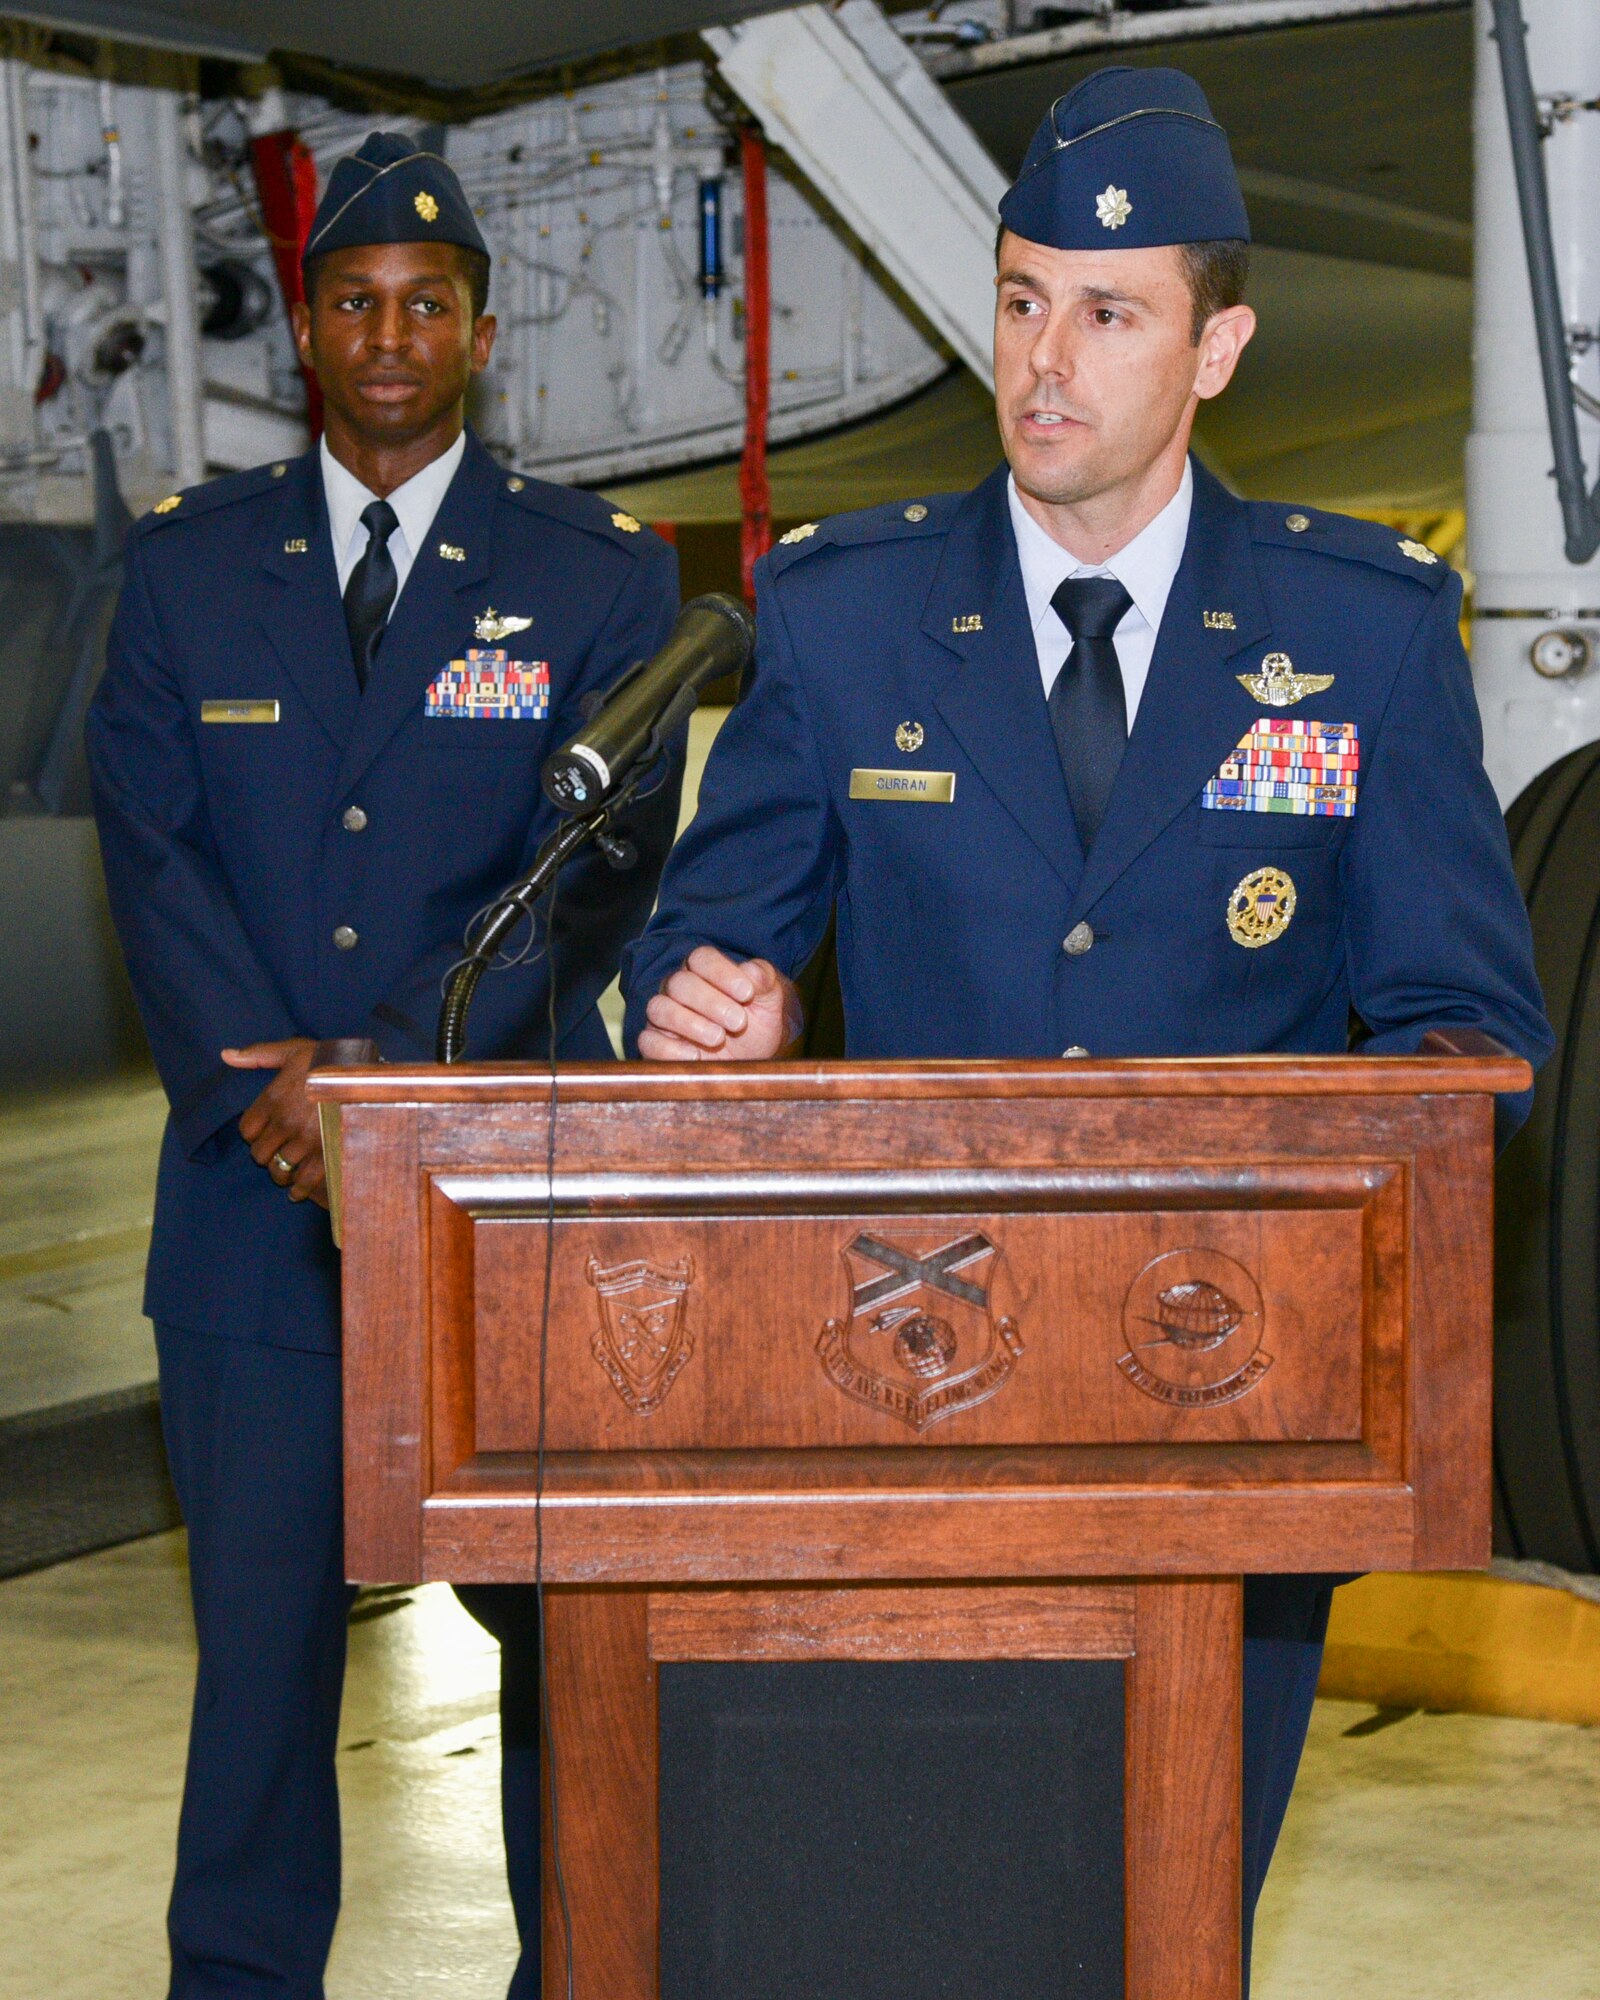 Lt. Col. Curran Addresses Guest During Change of Command Ceremon